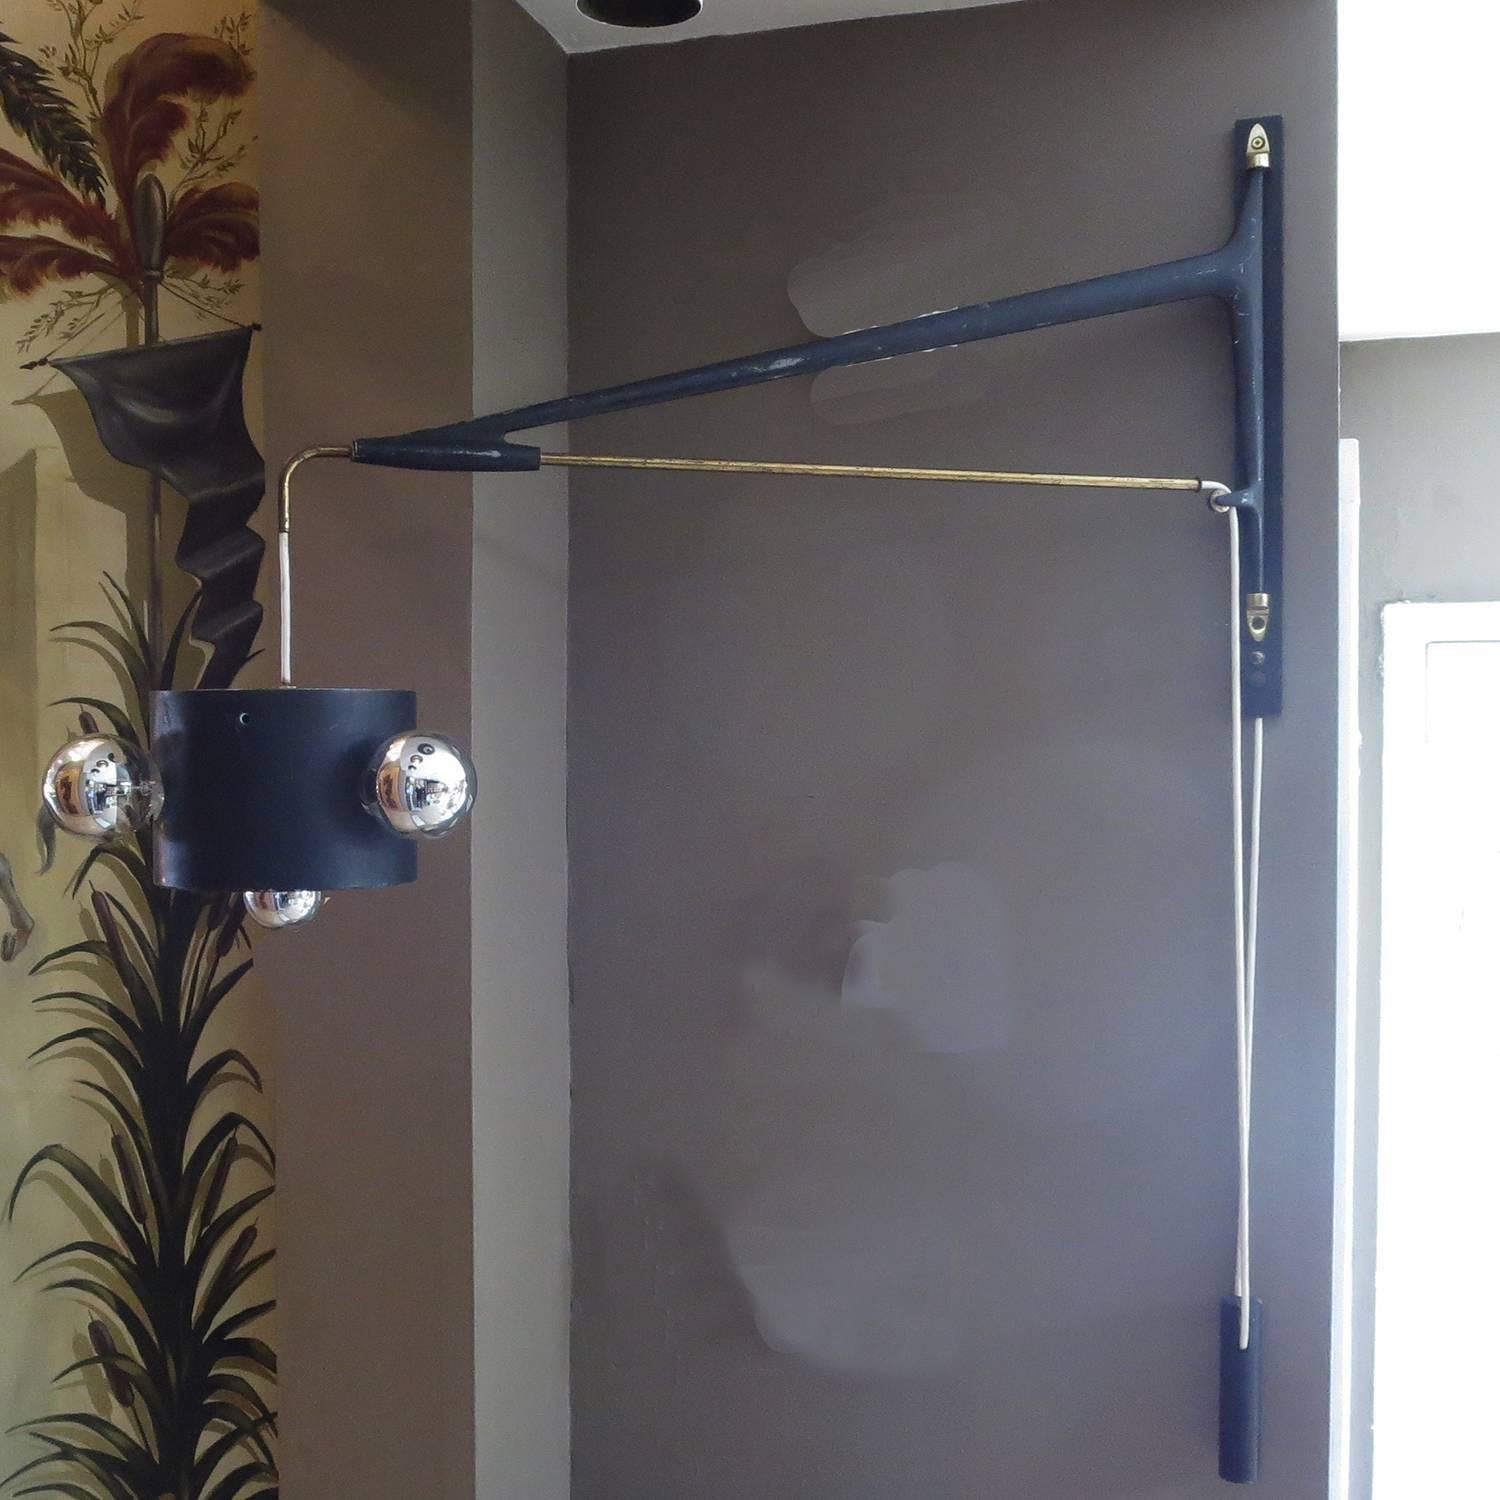 RETIREMENT SALE!!!  EVERYTHING MUST GO - CHECK OUT OUR OTHER ITEMS.				

A great design by the French master lighting designer, Maison Arlus. The swing arm is painted cast aluminum, with brass accents. A solid counter weight allows one to regulate